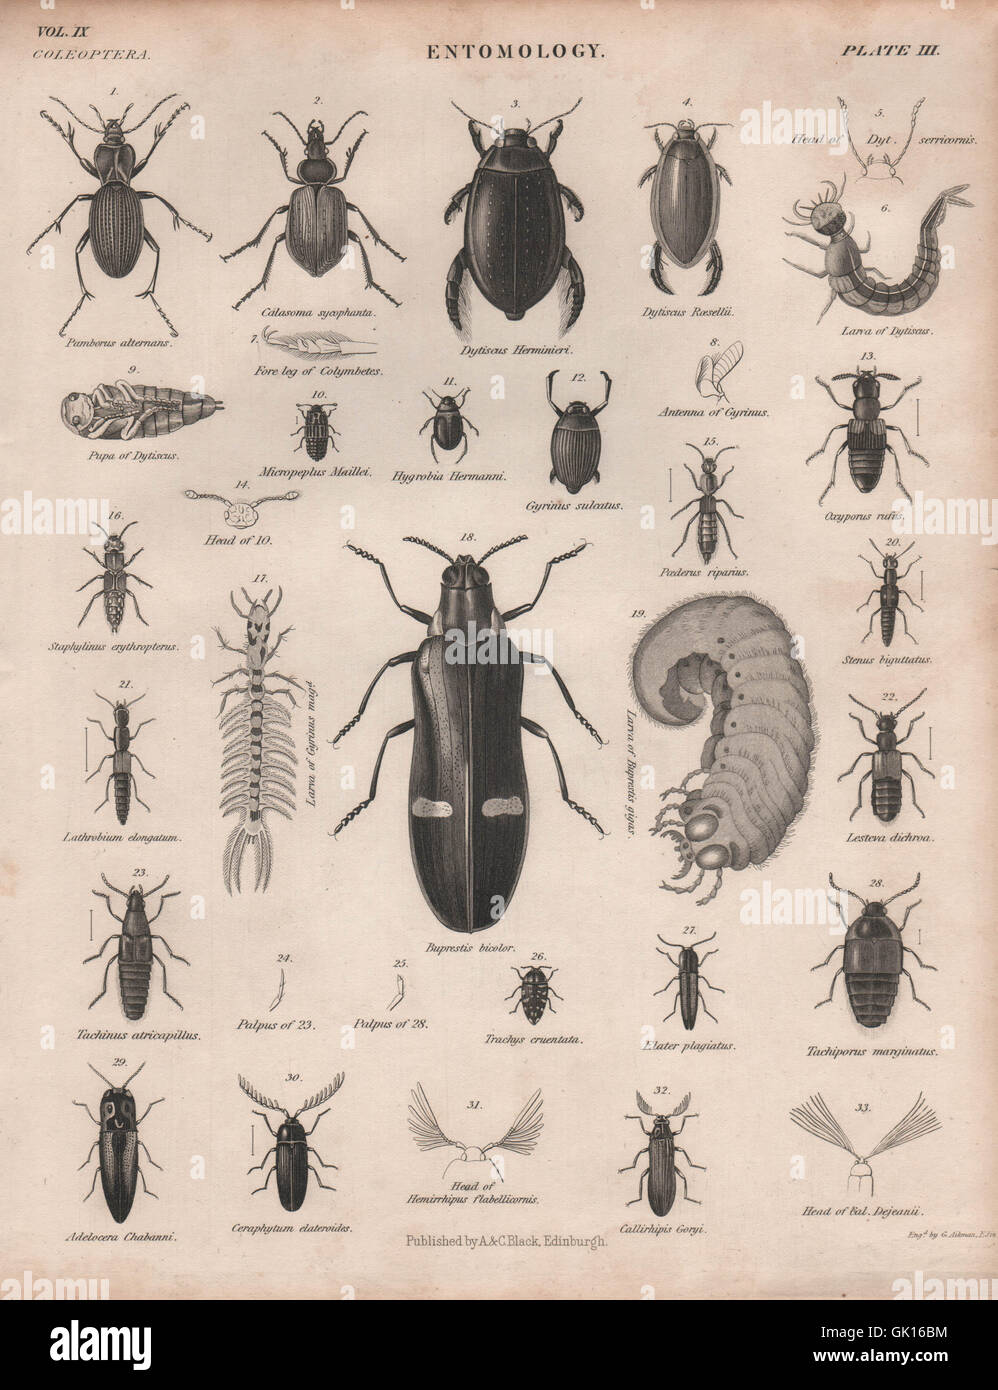 ENTOMOLOGY 3. Insects beetles. BRITANNICA, antique print 1860 Stock Photo